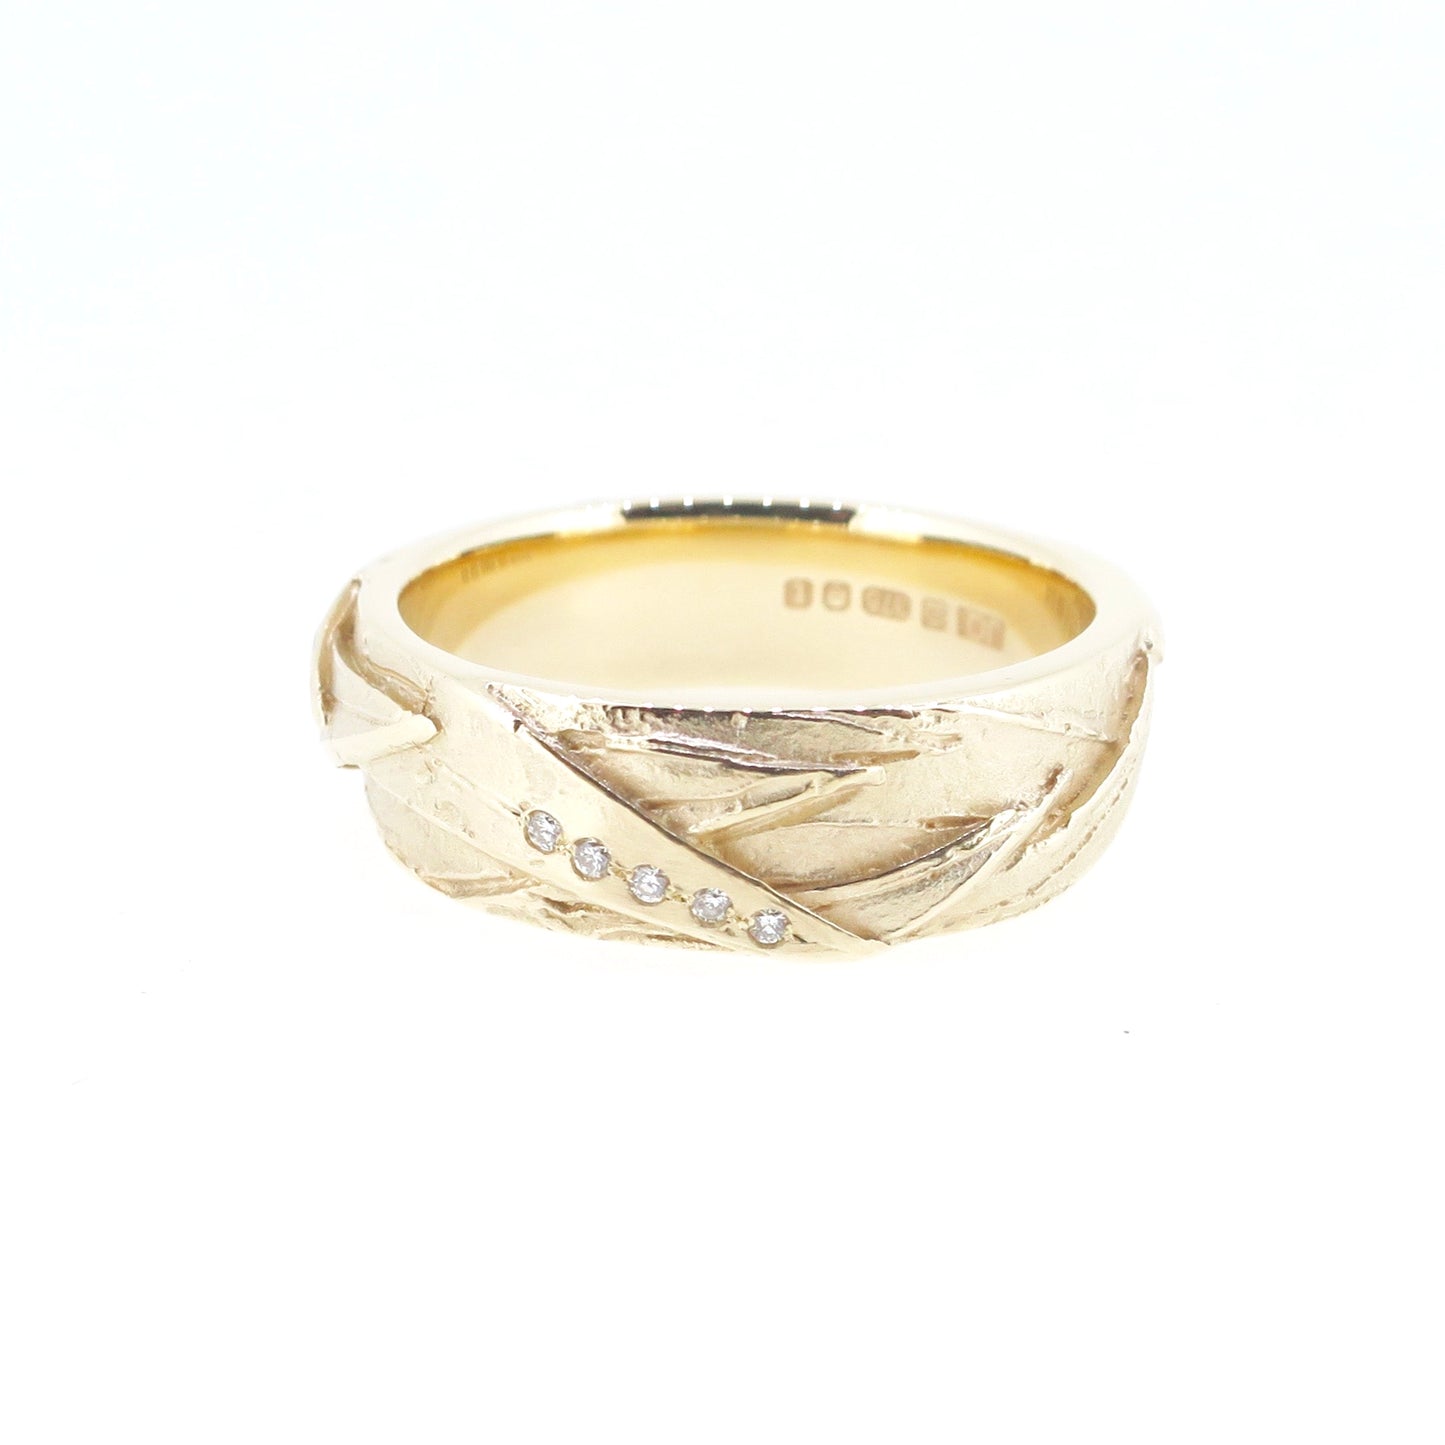 Woven ring with diamonds